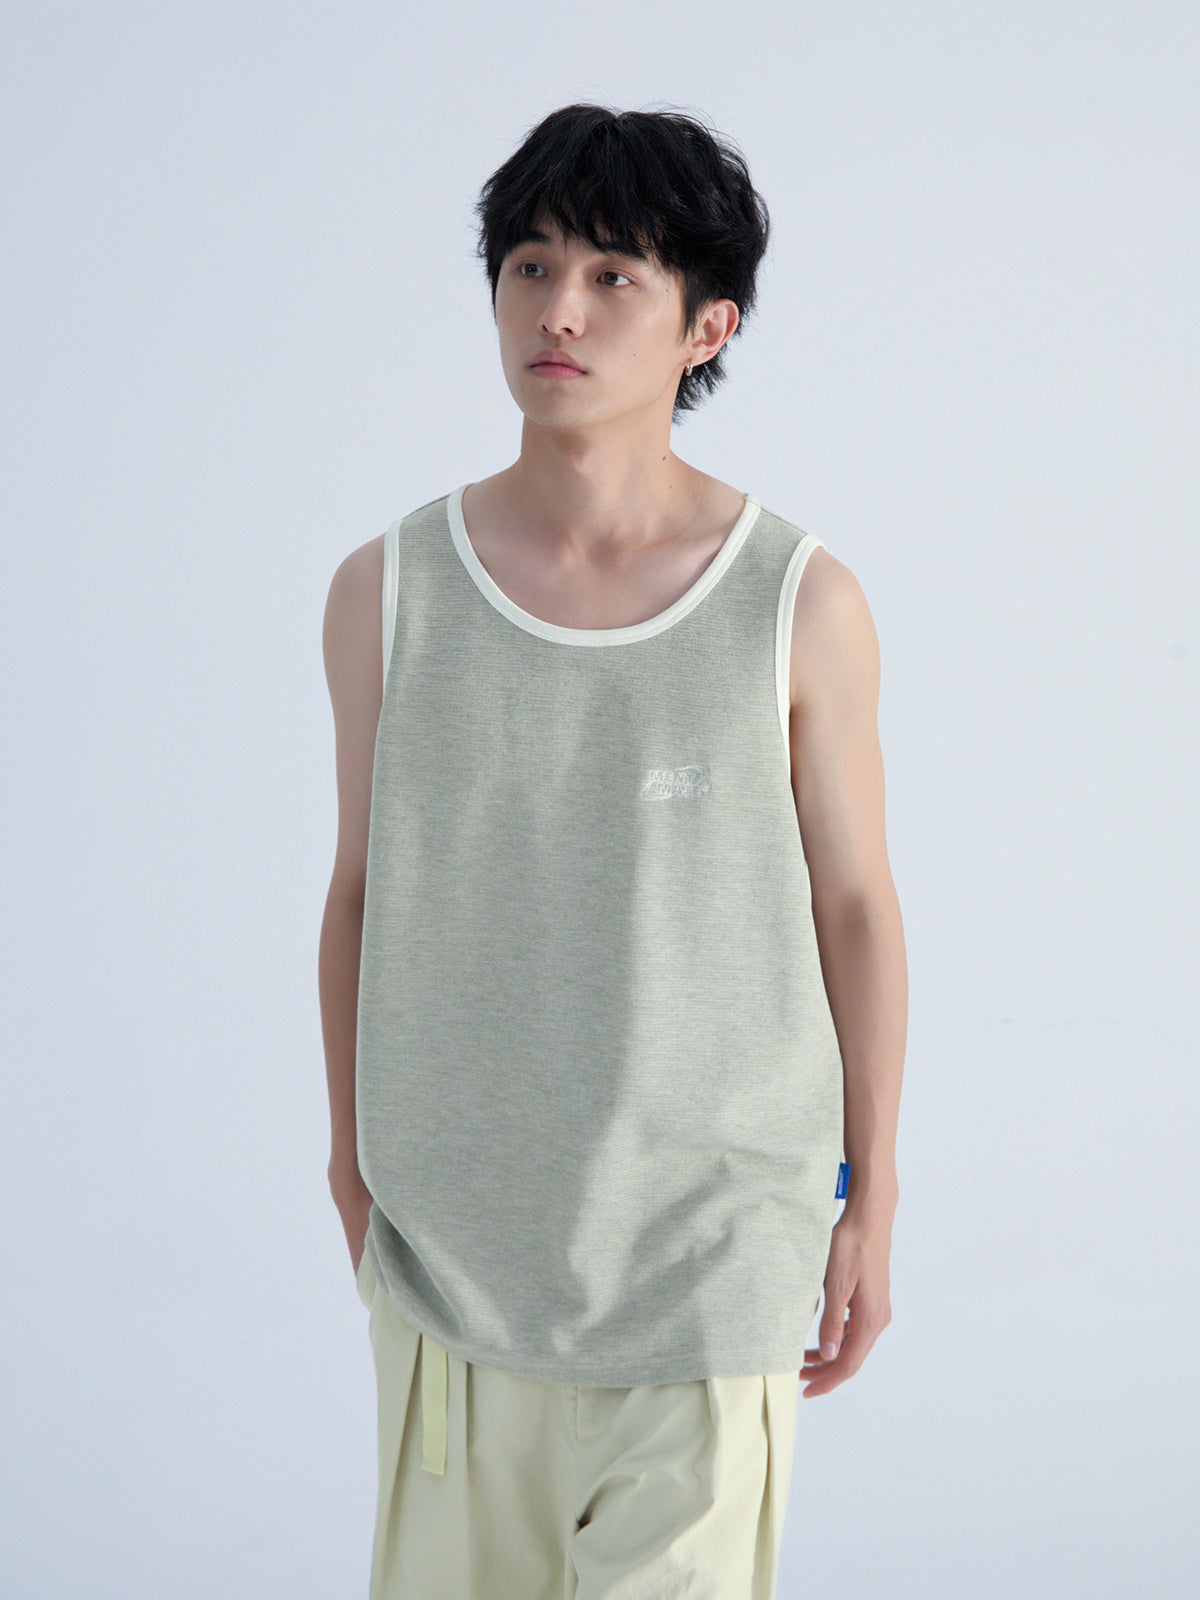 Contrast Outlined Casual Tank Top Korean Street Fashion Tank Top By Mentmate Shop Online at OH Vault